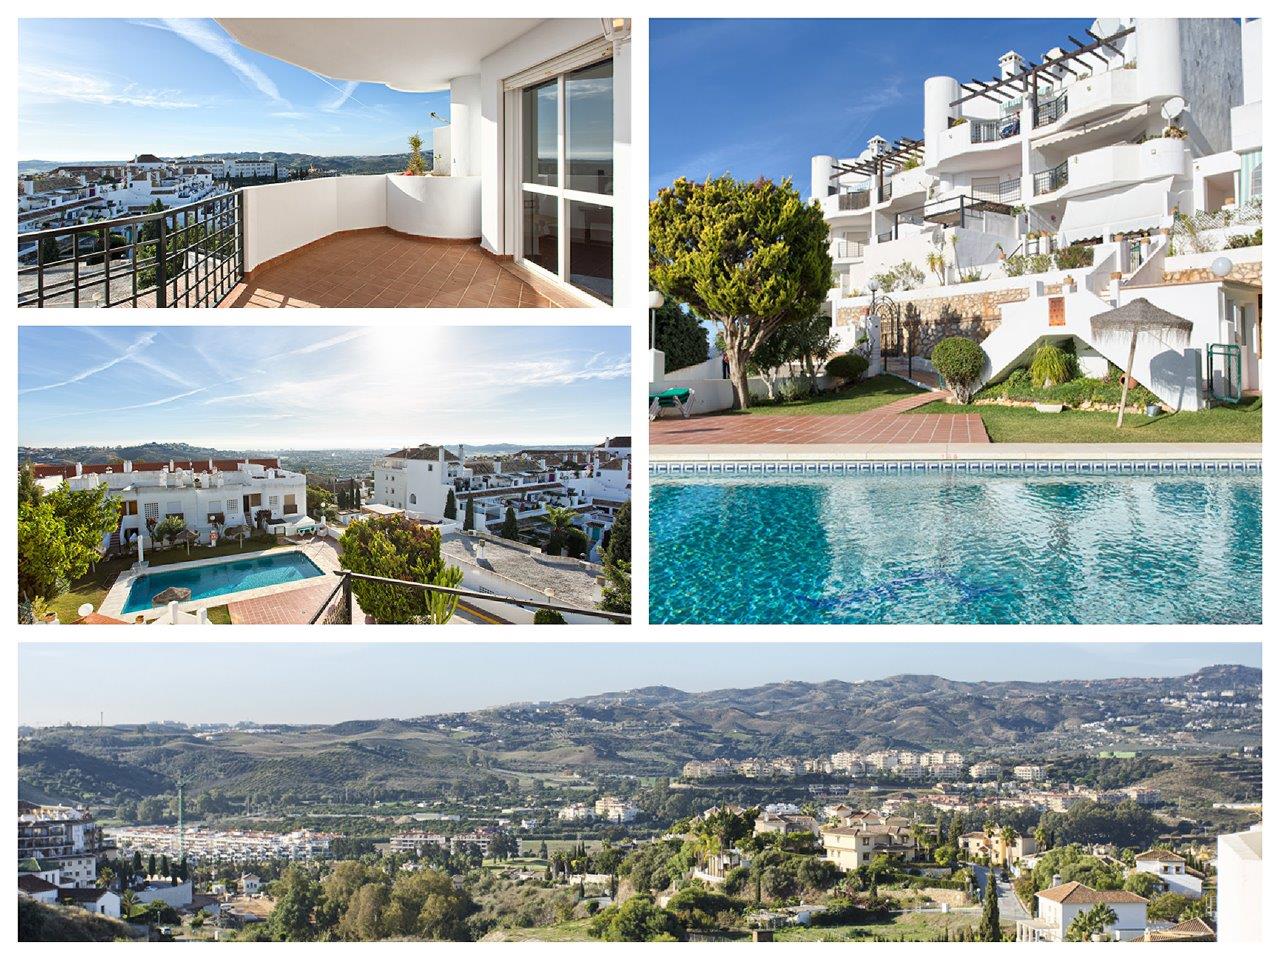 in Mijas Golf for sale with stunning views - just 126,000